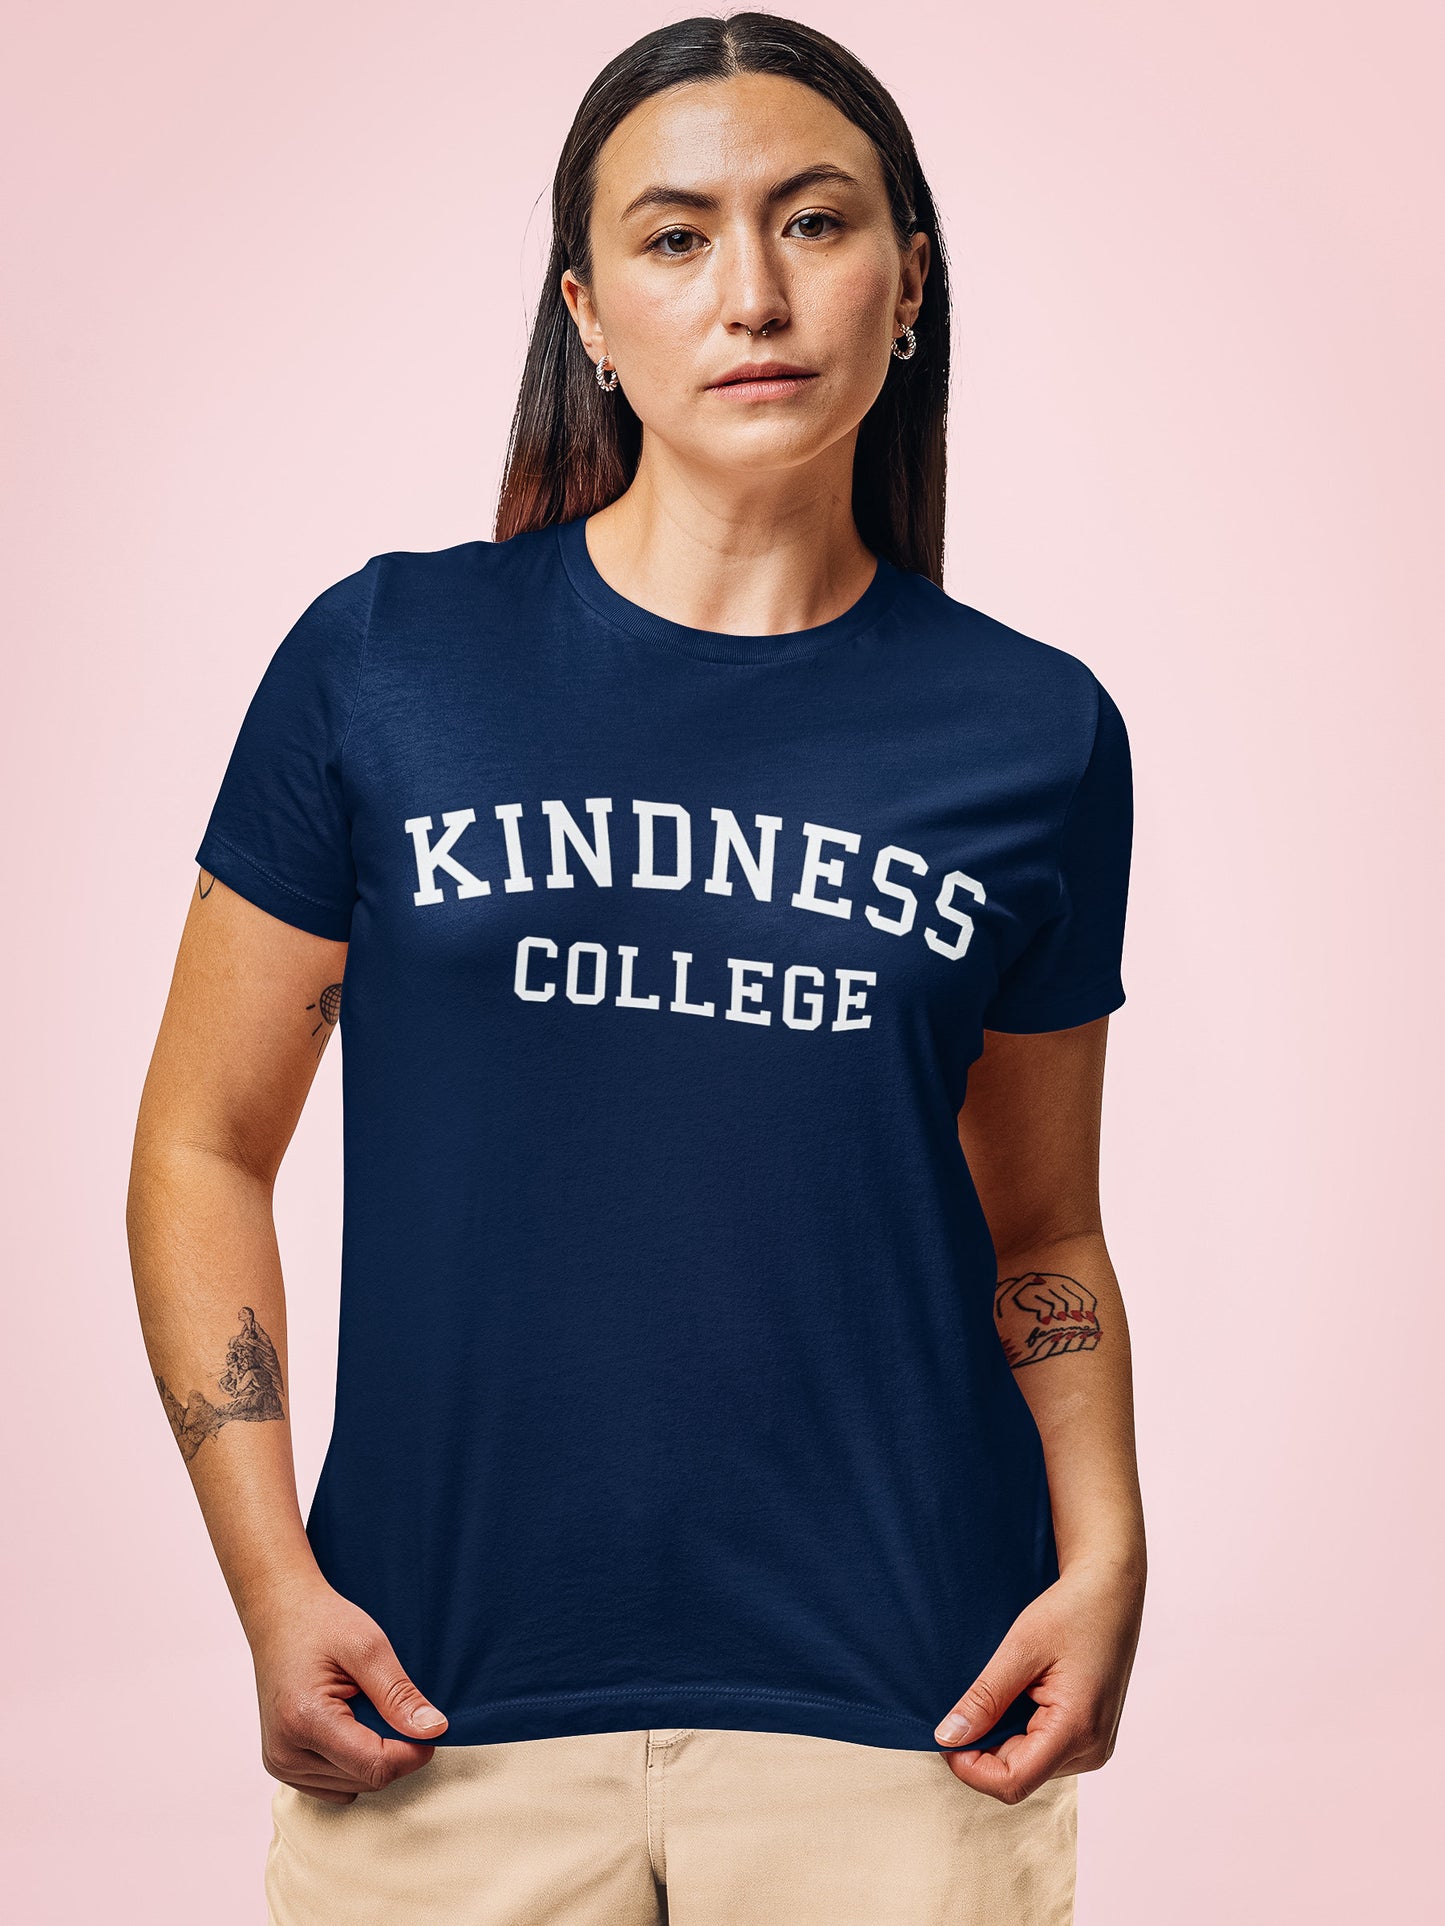 Kindness College T-Shirt | Vintage Inspired Varsity Athletic Tees 